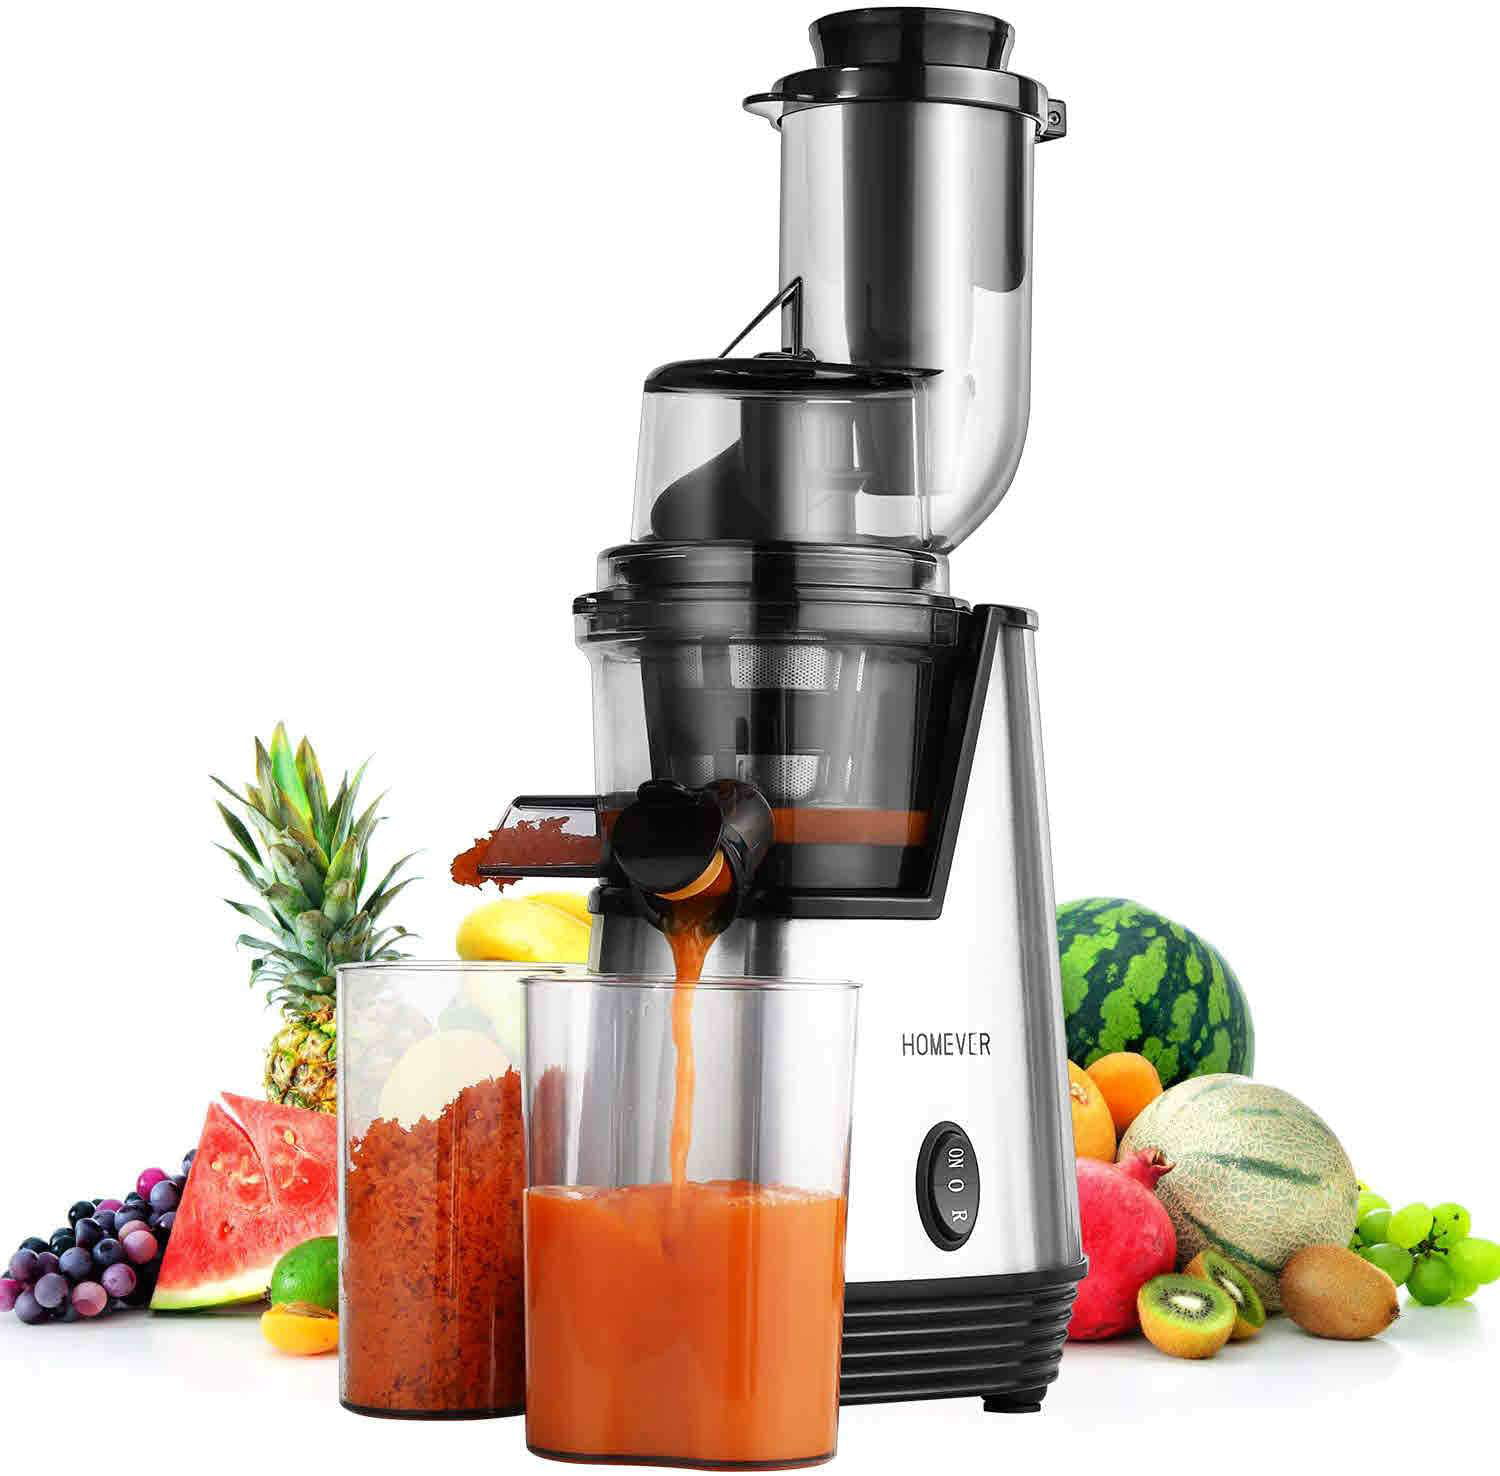 Juicer Machine BPA-Free Slow Masticating Juicer for Vegetable and Fruit Easy to Clean with Juice Jug&Brush Quiet Motor and Reverse Function Renewed Silver  HOMEVER Cold Press Juicer with 95% Juice Yield 